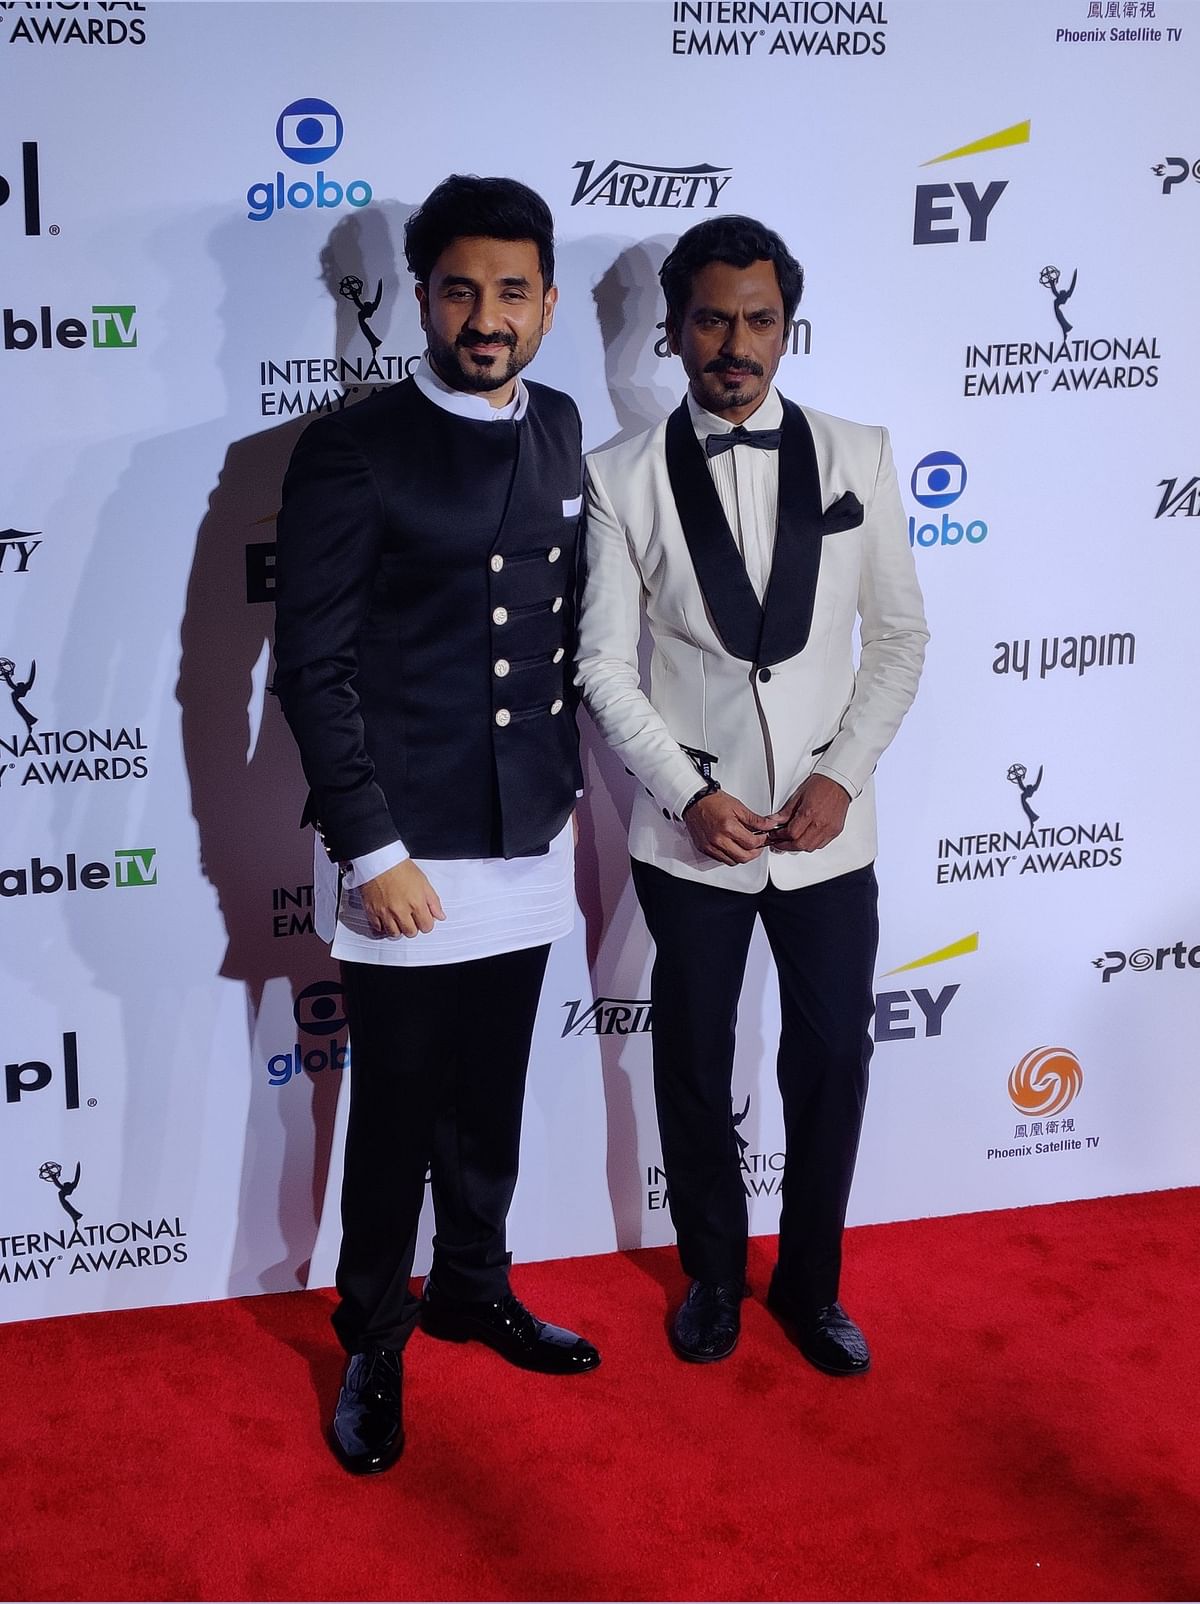 Vir Das was nominated at the Emmys under the comedy segment but lost to Call My Agent Season 4 from France.